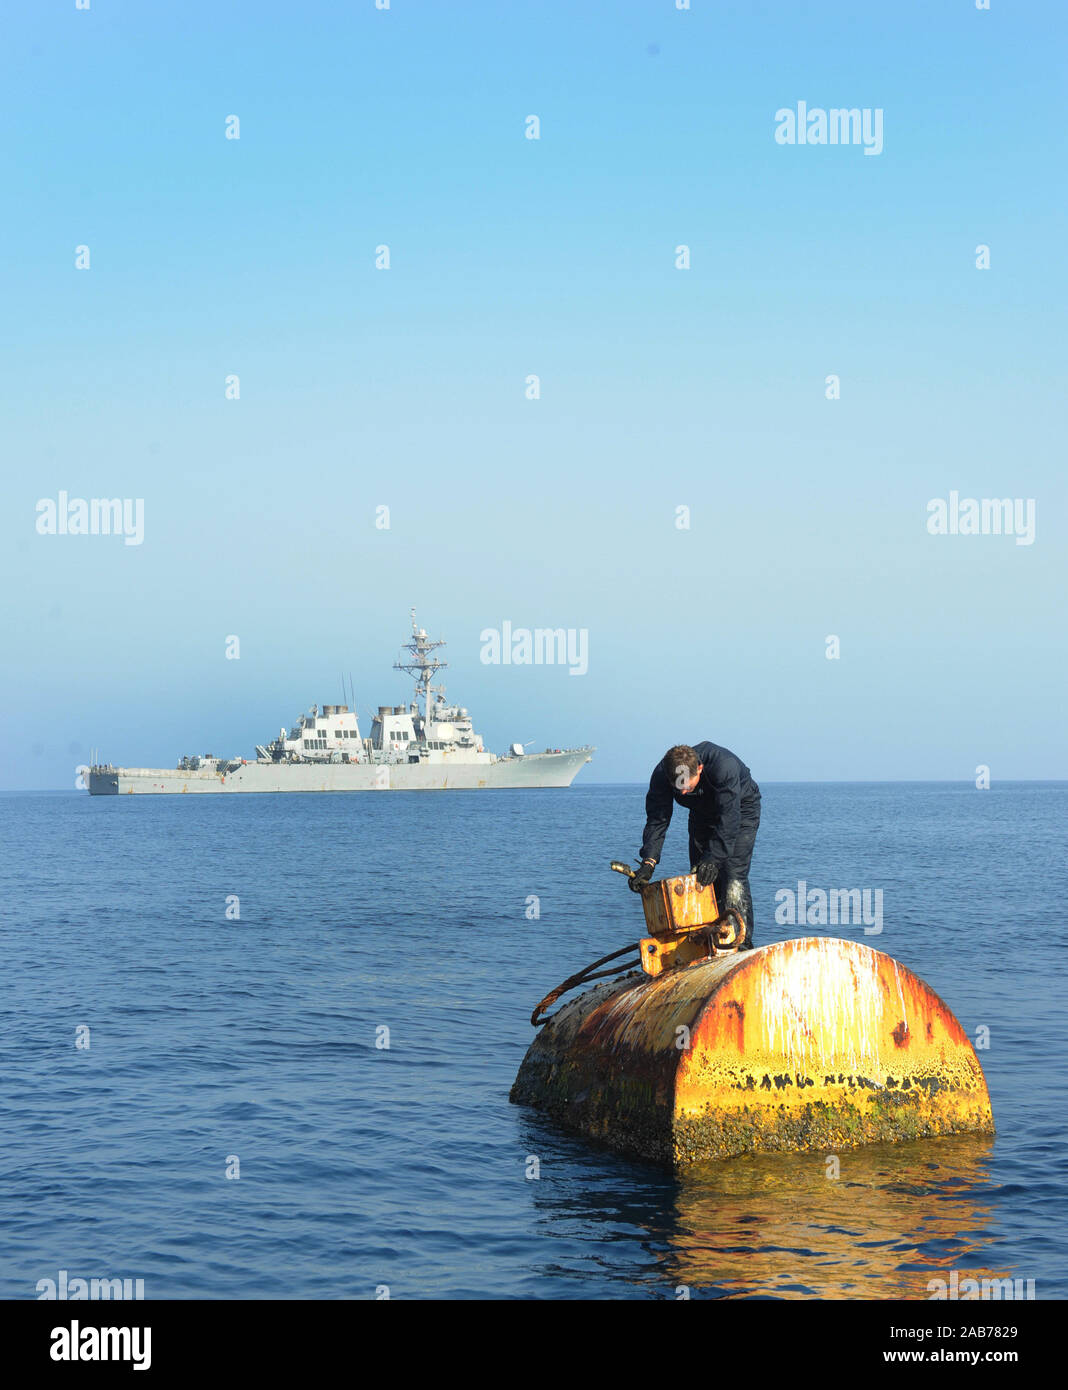 ARABIAN SEA (Oct. 9, 2012) A Navy Diver 3rd Class, assigned to Mobile Diving and Salvage Unit (MSDU) 1, Company 1-5 looks for identification information during a salvage survey of a drifting buoy while the guided-missile destroyer USS Benfold (DDG 65) waits nearby. Stock Photo